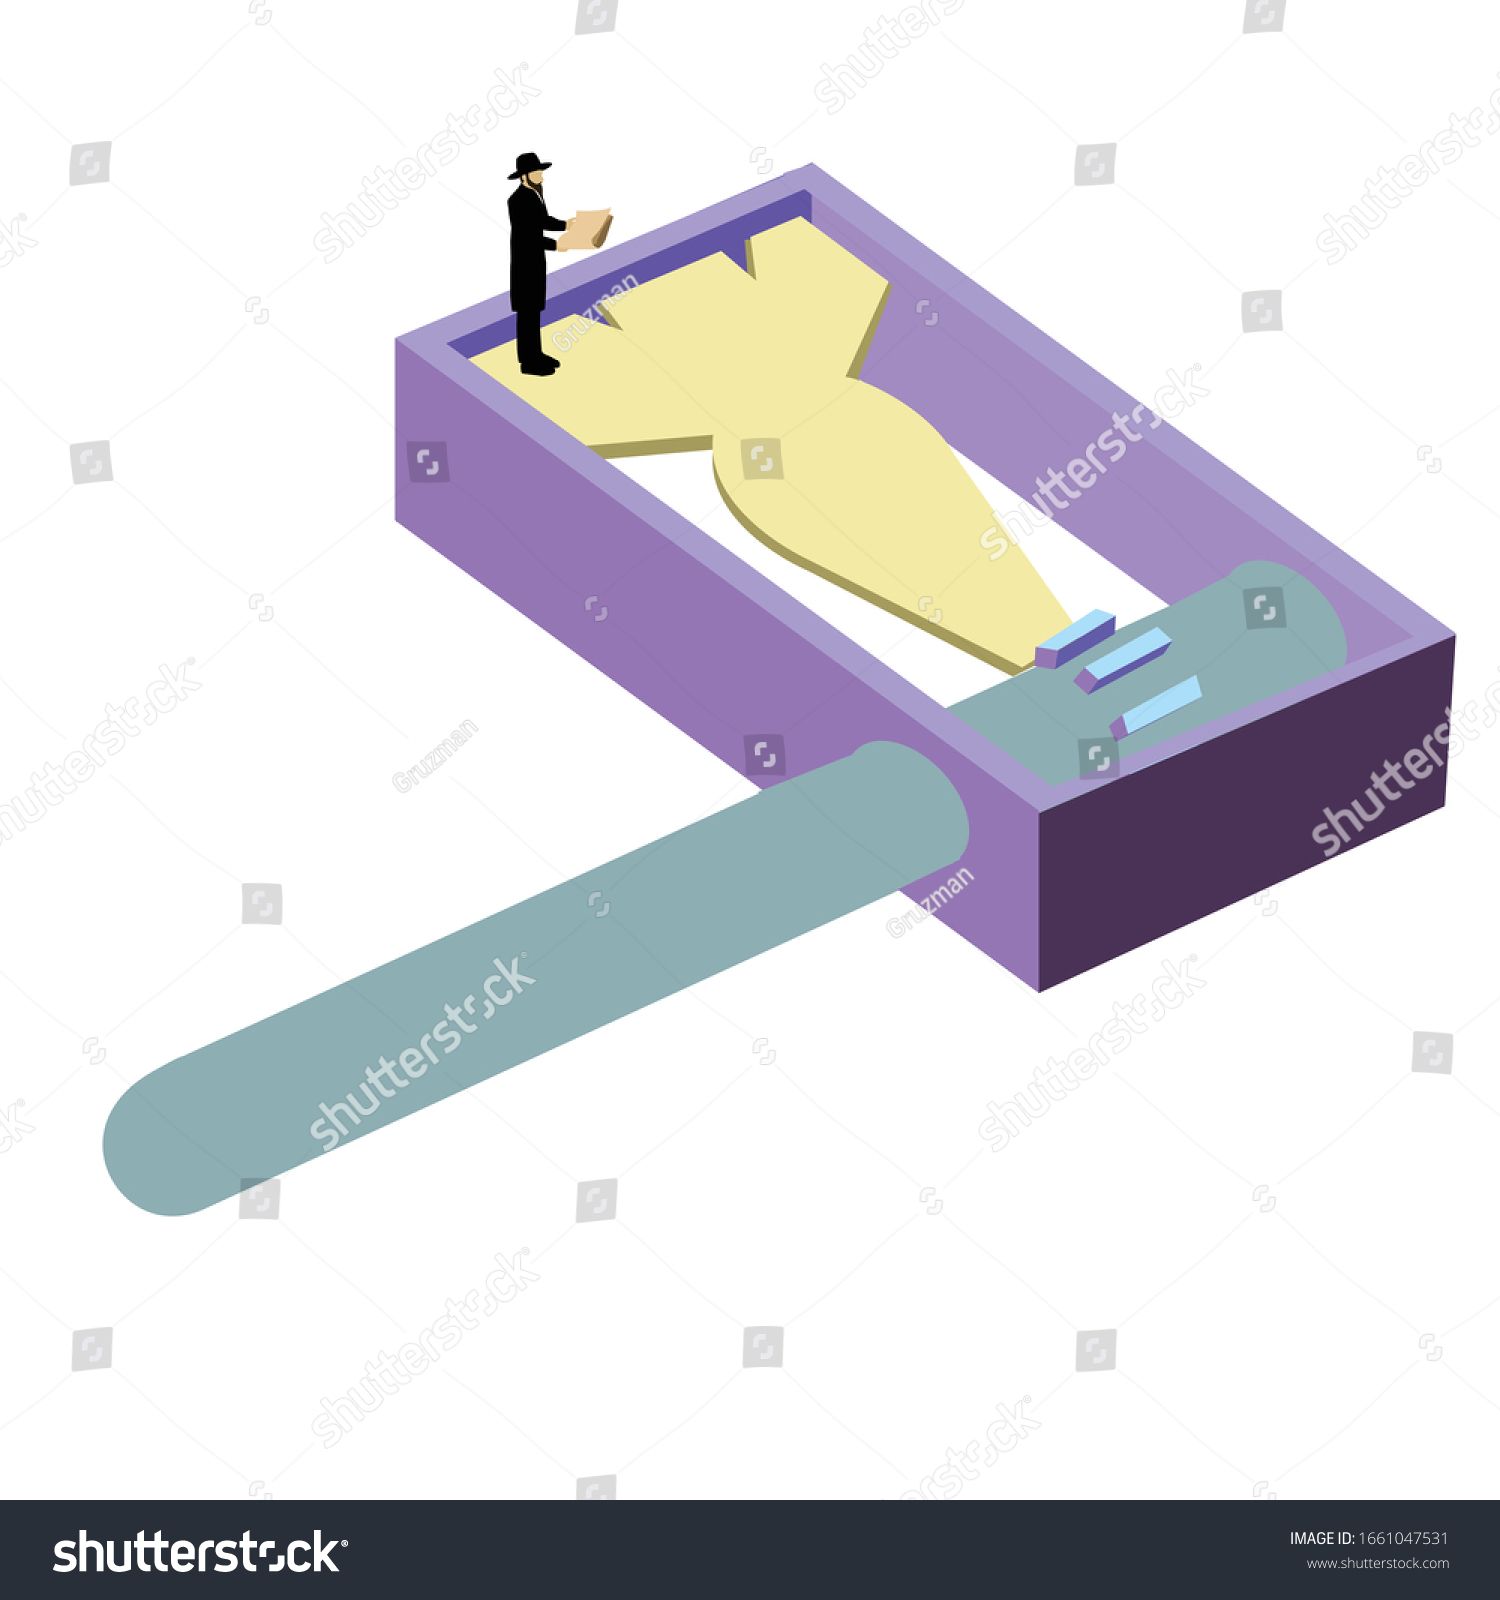 stock-vector-huge-colorful-rattle-on-it-stands-a-dwarf-figure-of-a-jewish-ultra-orthodox-man-r...jpg